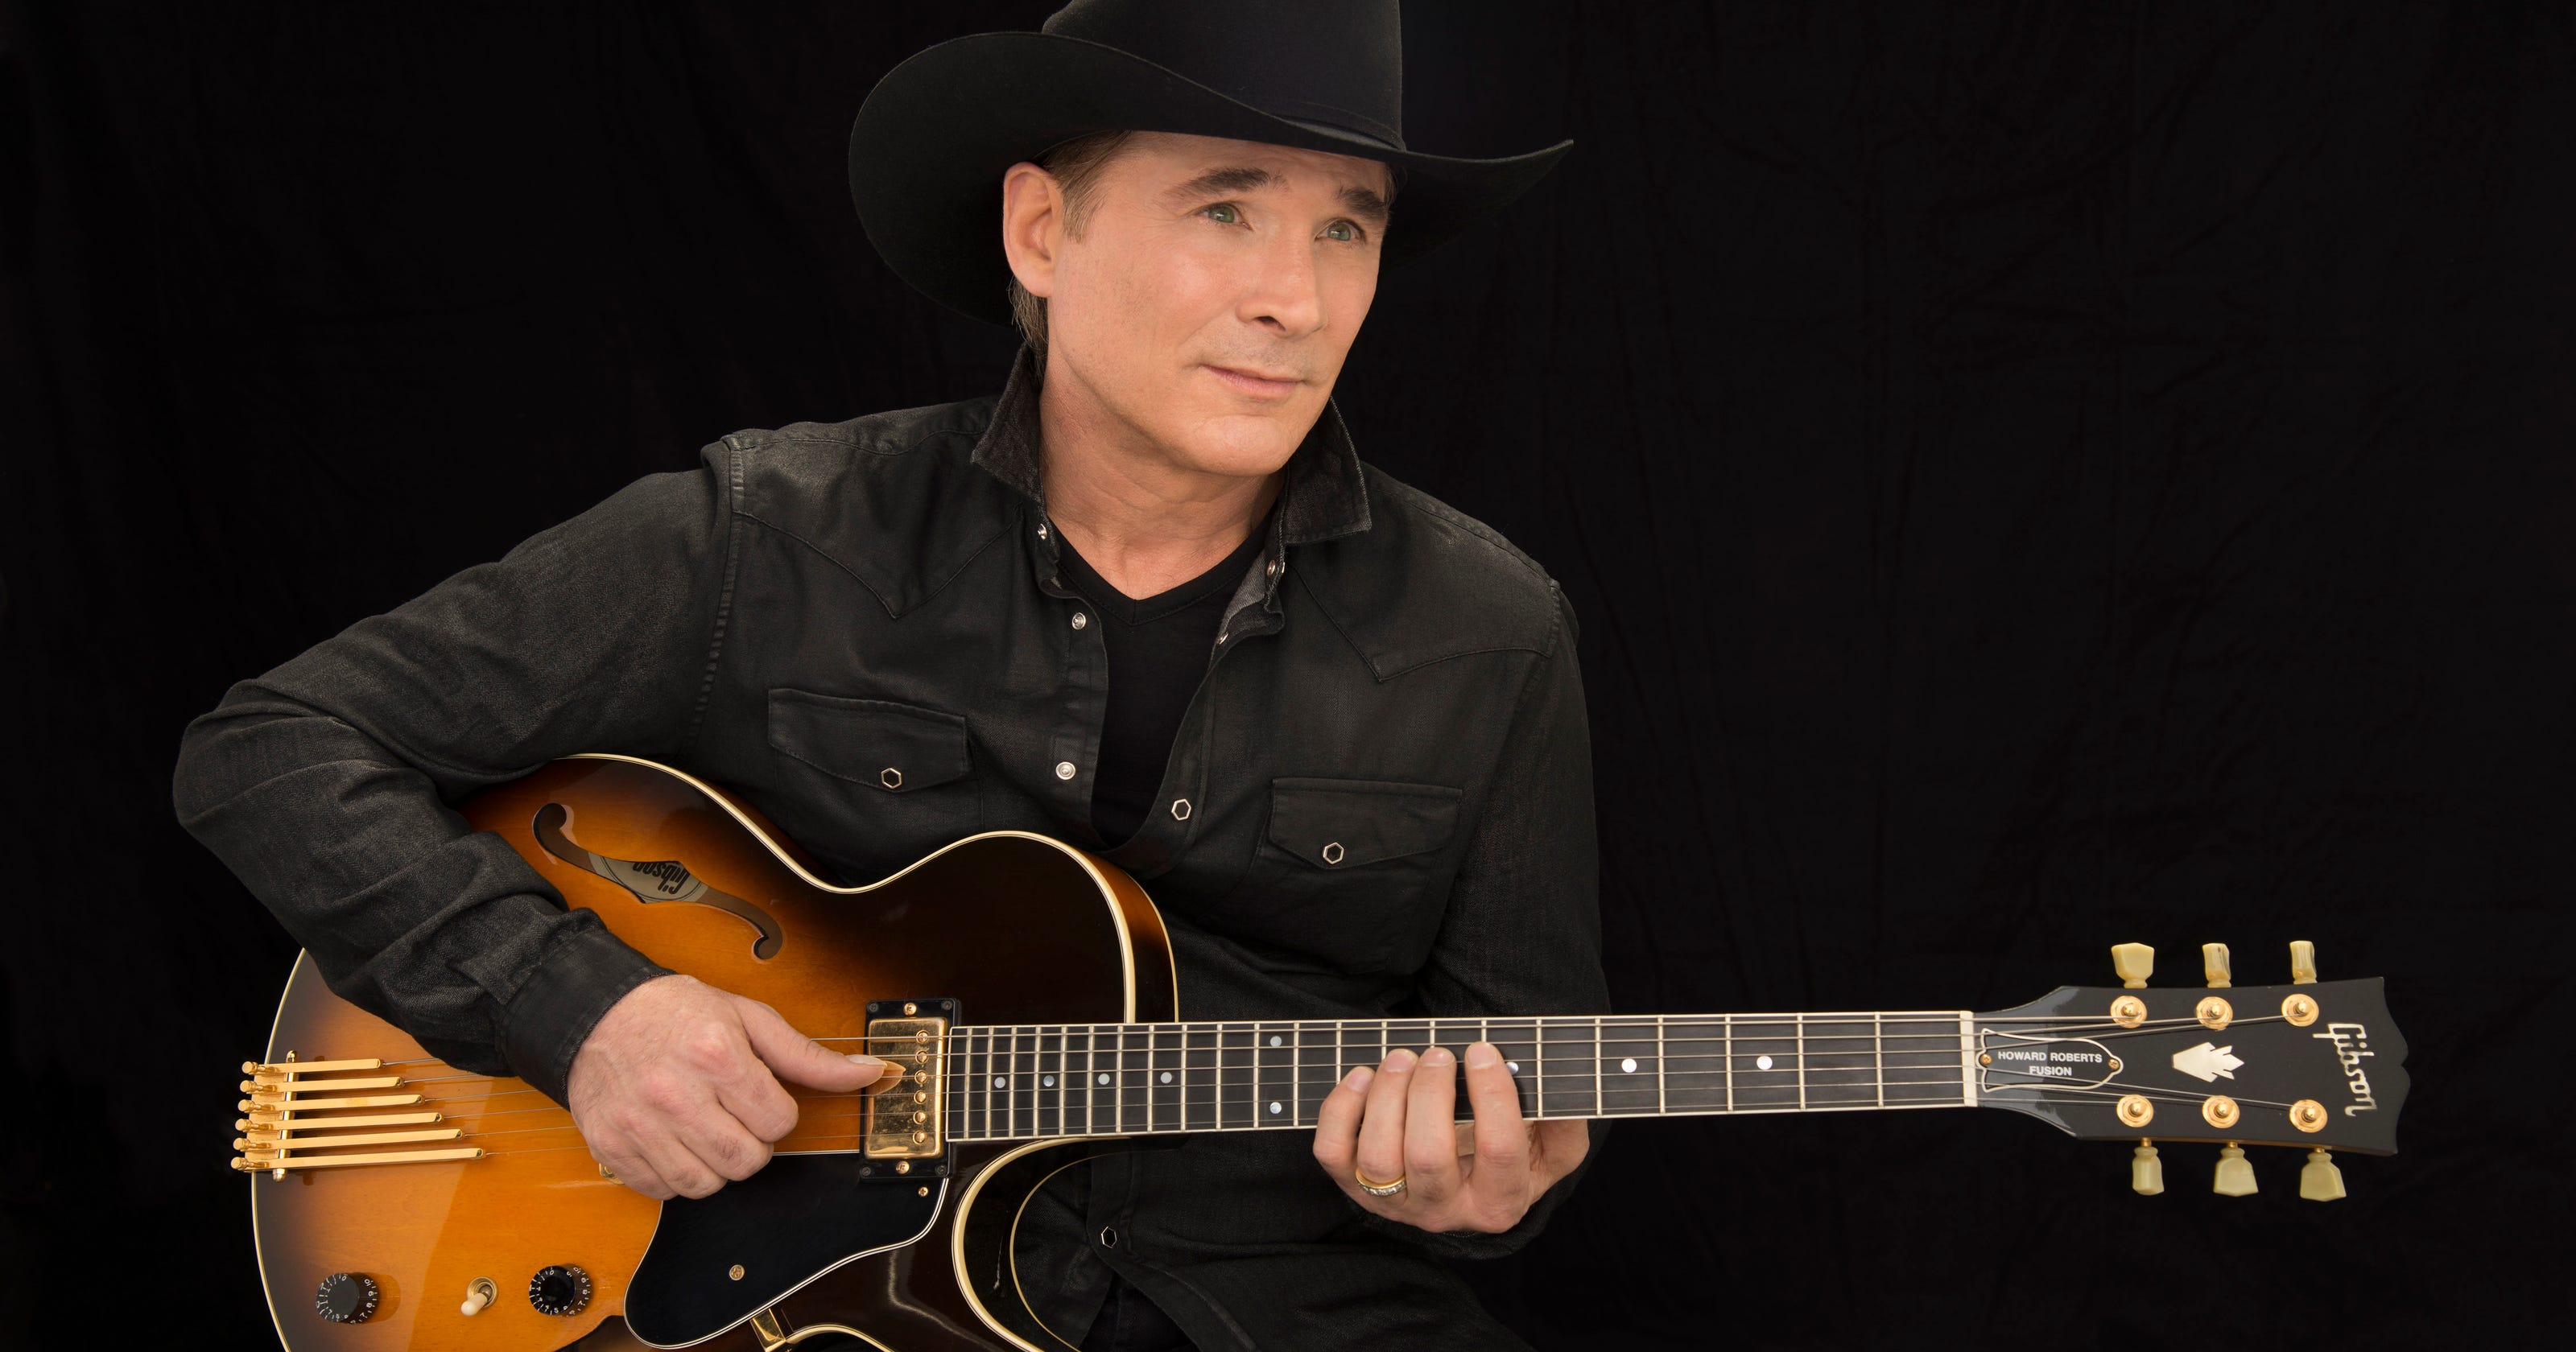 Clint Black makes a comeback with new music, tour